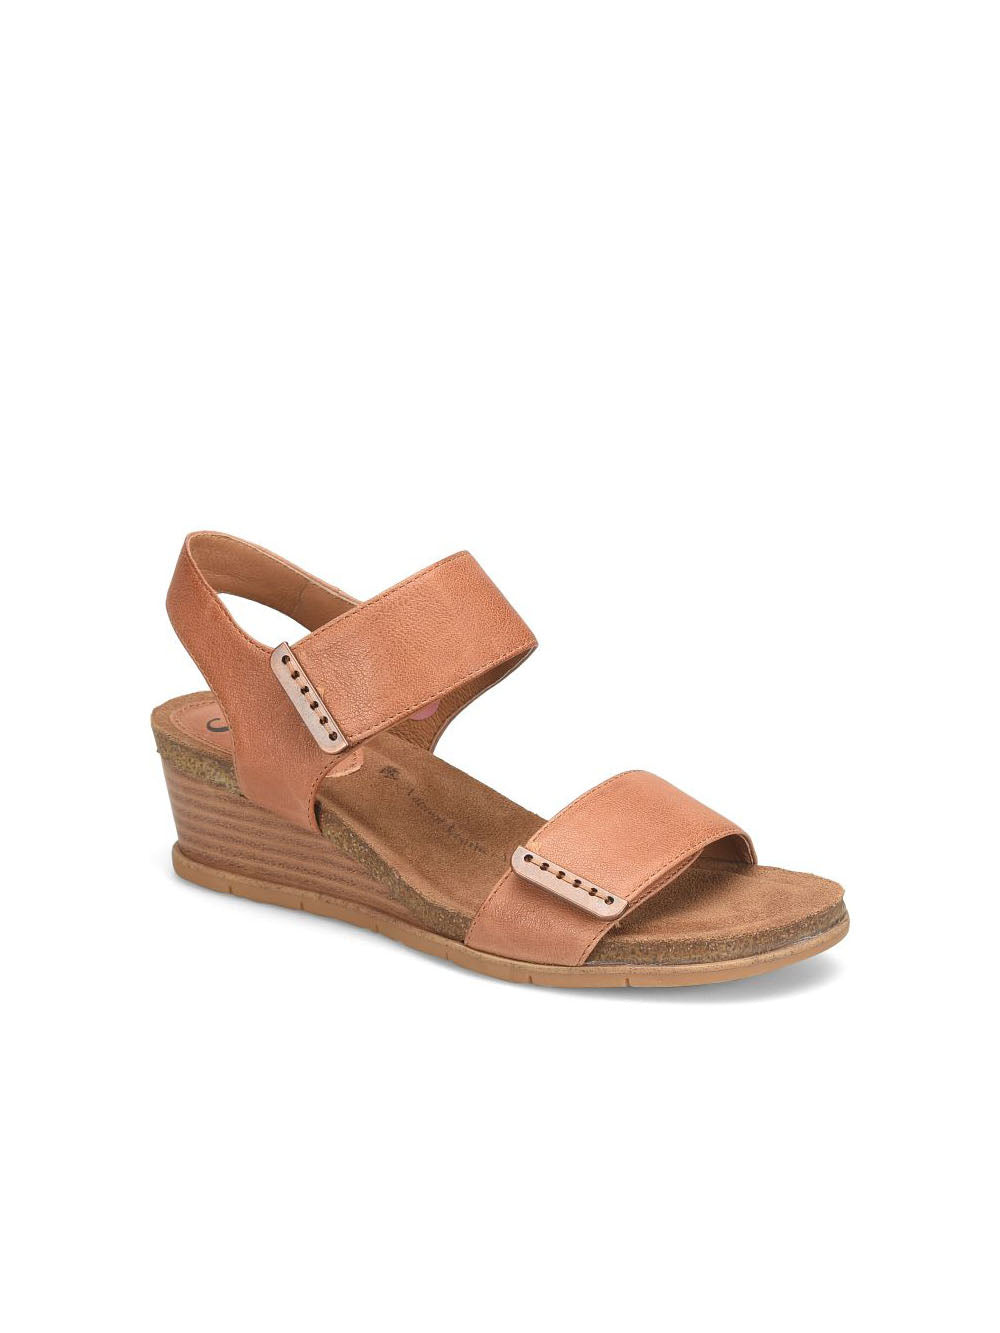 sofft shoes verdi ii strap wedge sandals in luggage tan